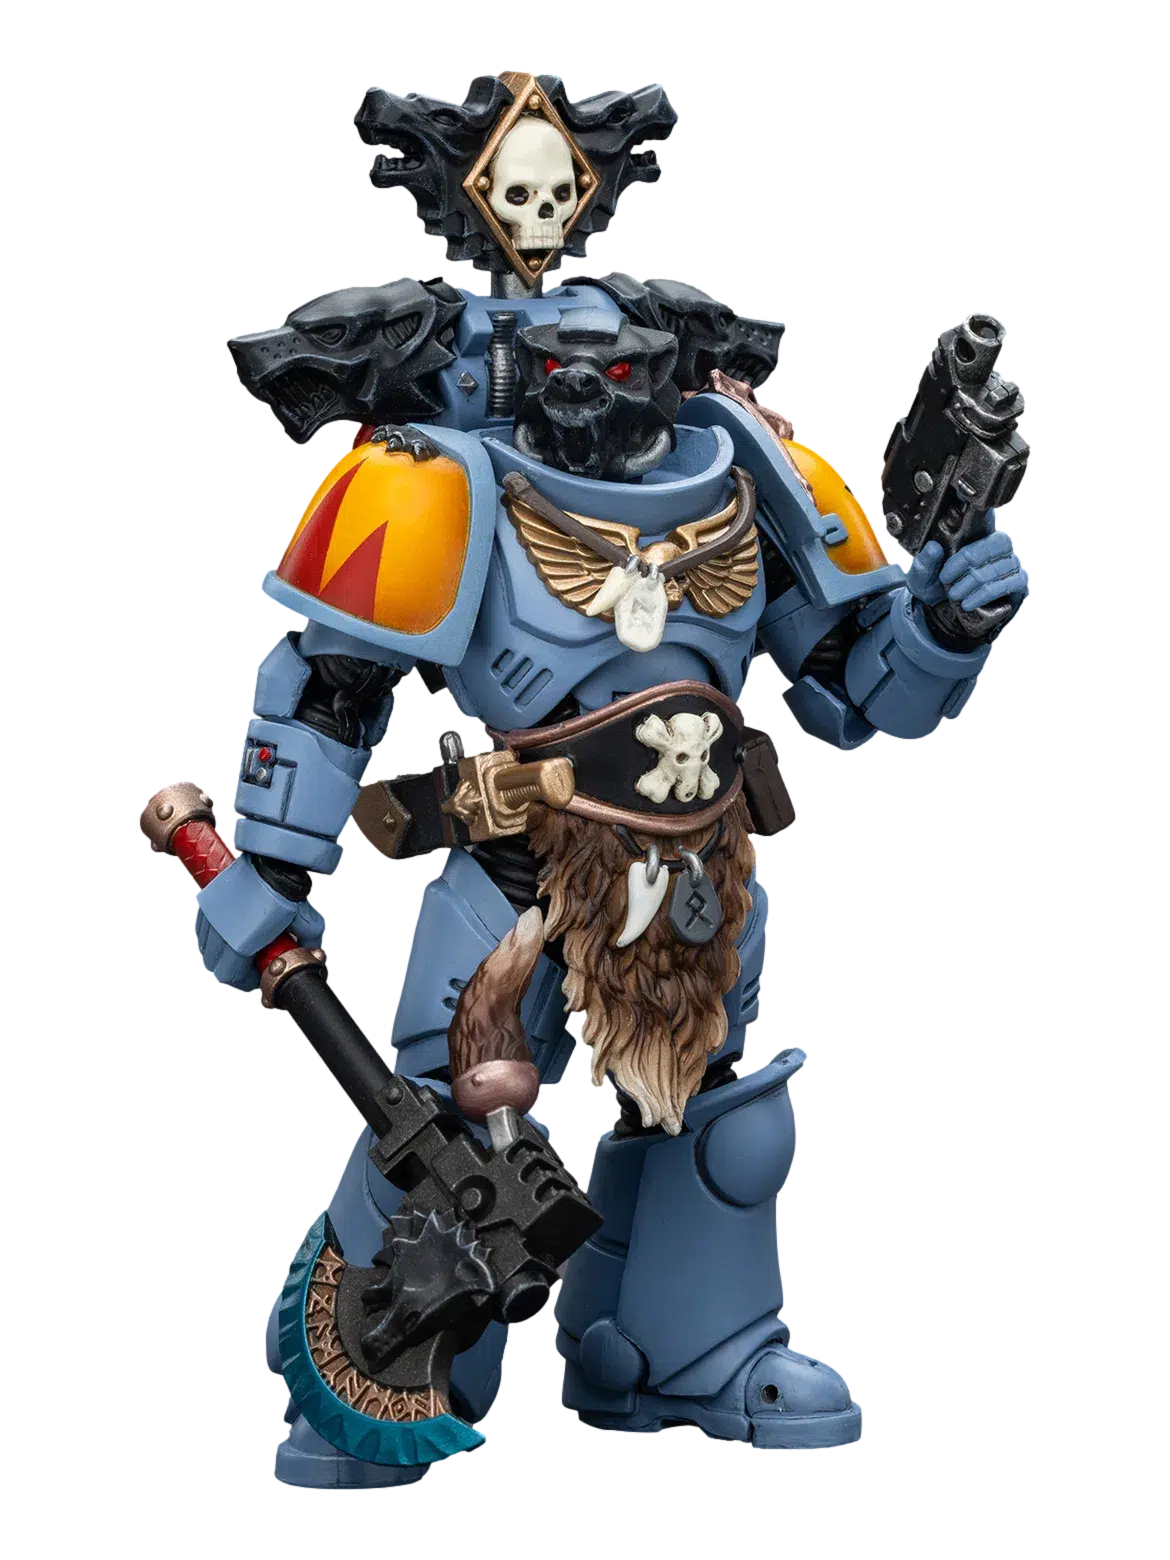 Warhammer 40K: Space Wolves: Claw Pack: Brother Olaf: Joy Toy